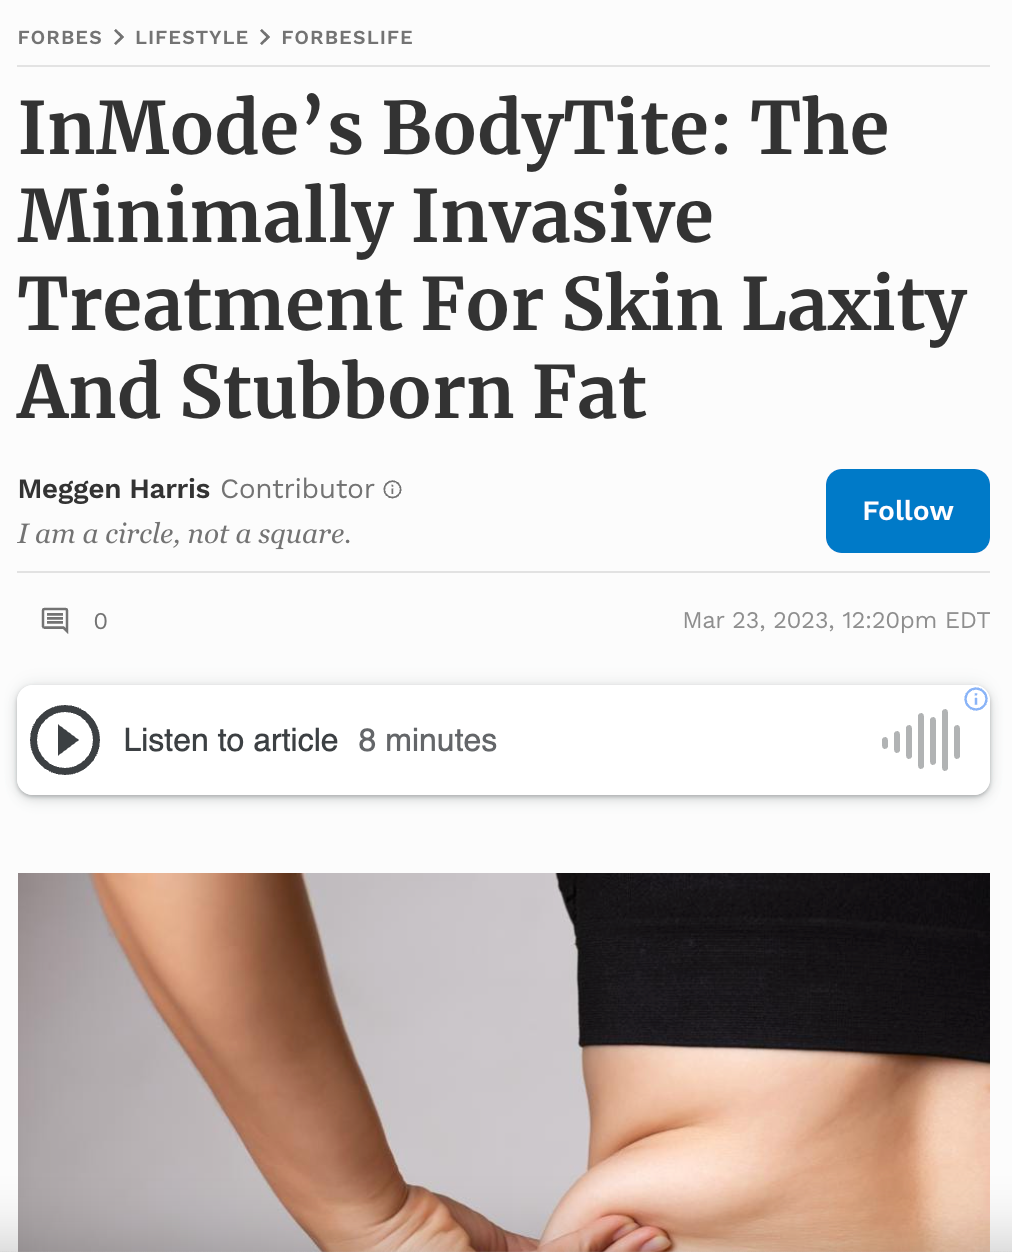 InMode In The Press: Treat Stubborn Fat Effectively With BodyTite